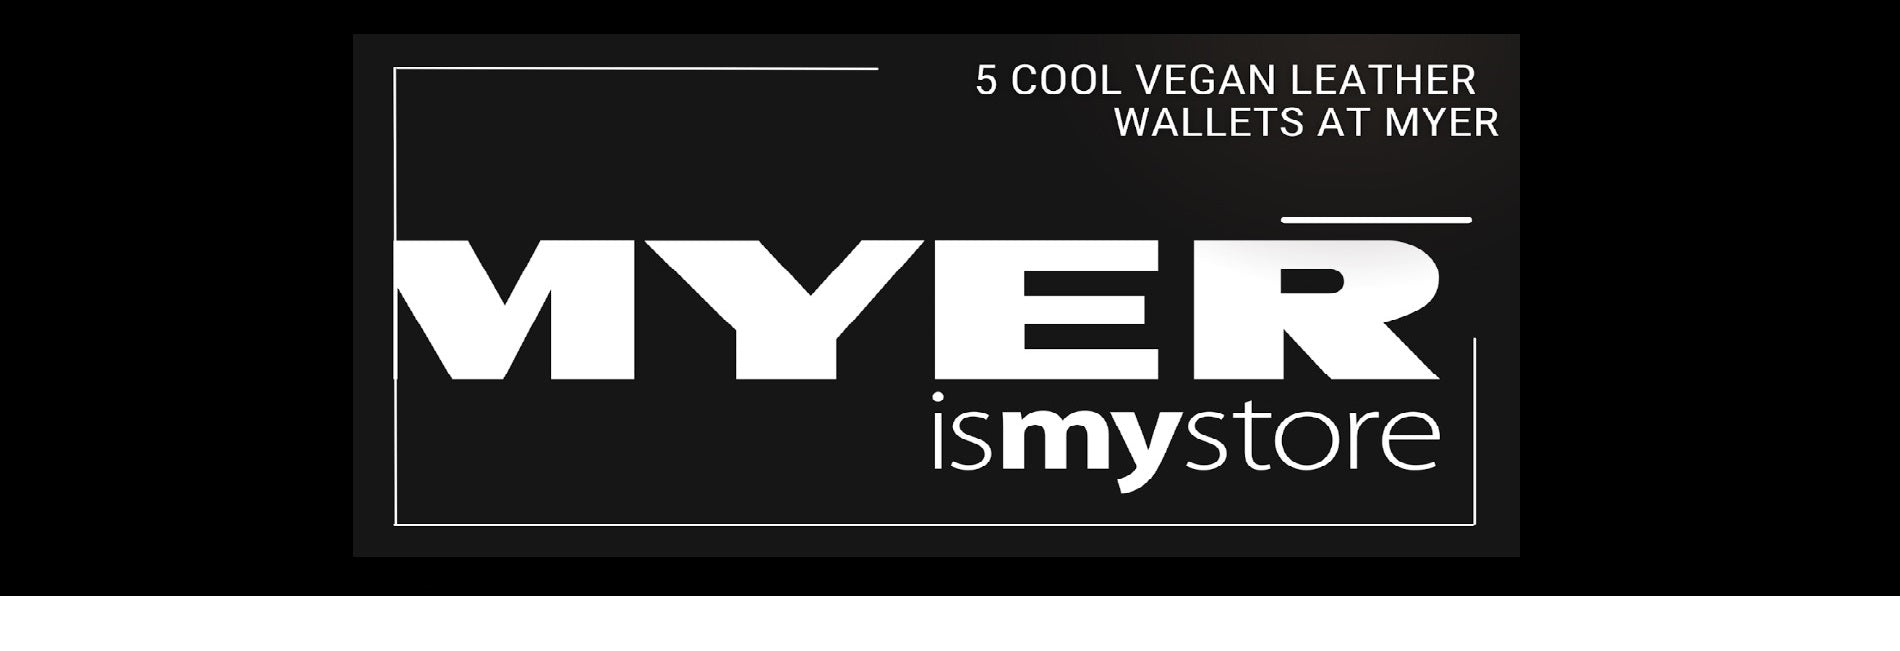 5 COOL VEGAN LEATHER WALLETS AT MYER